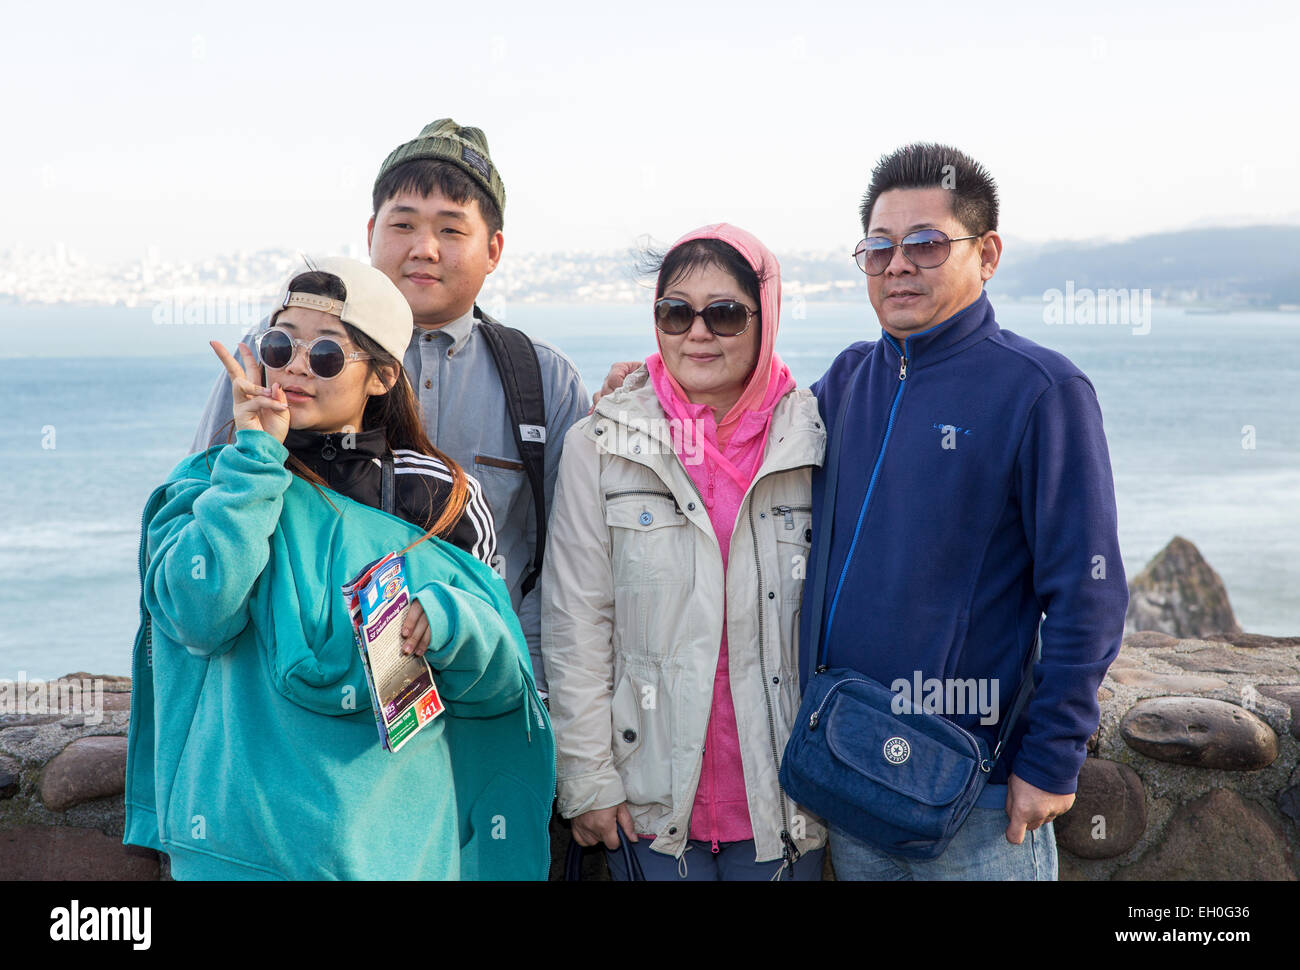 Asian family, family photo, posing for photograph, tourists, visitors, north side of Golden Gate Bridge, Vista Point, city of Sausalito, California Stock Photo